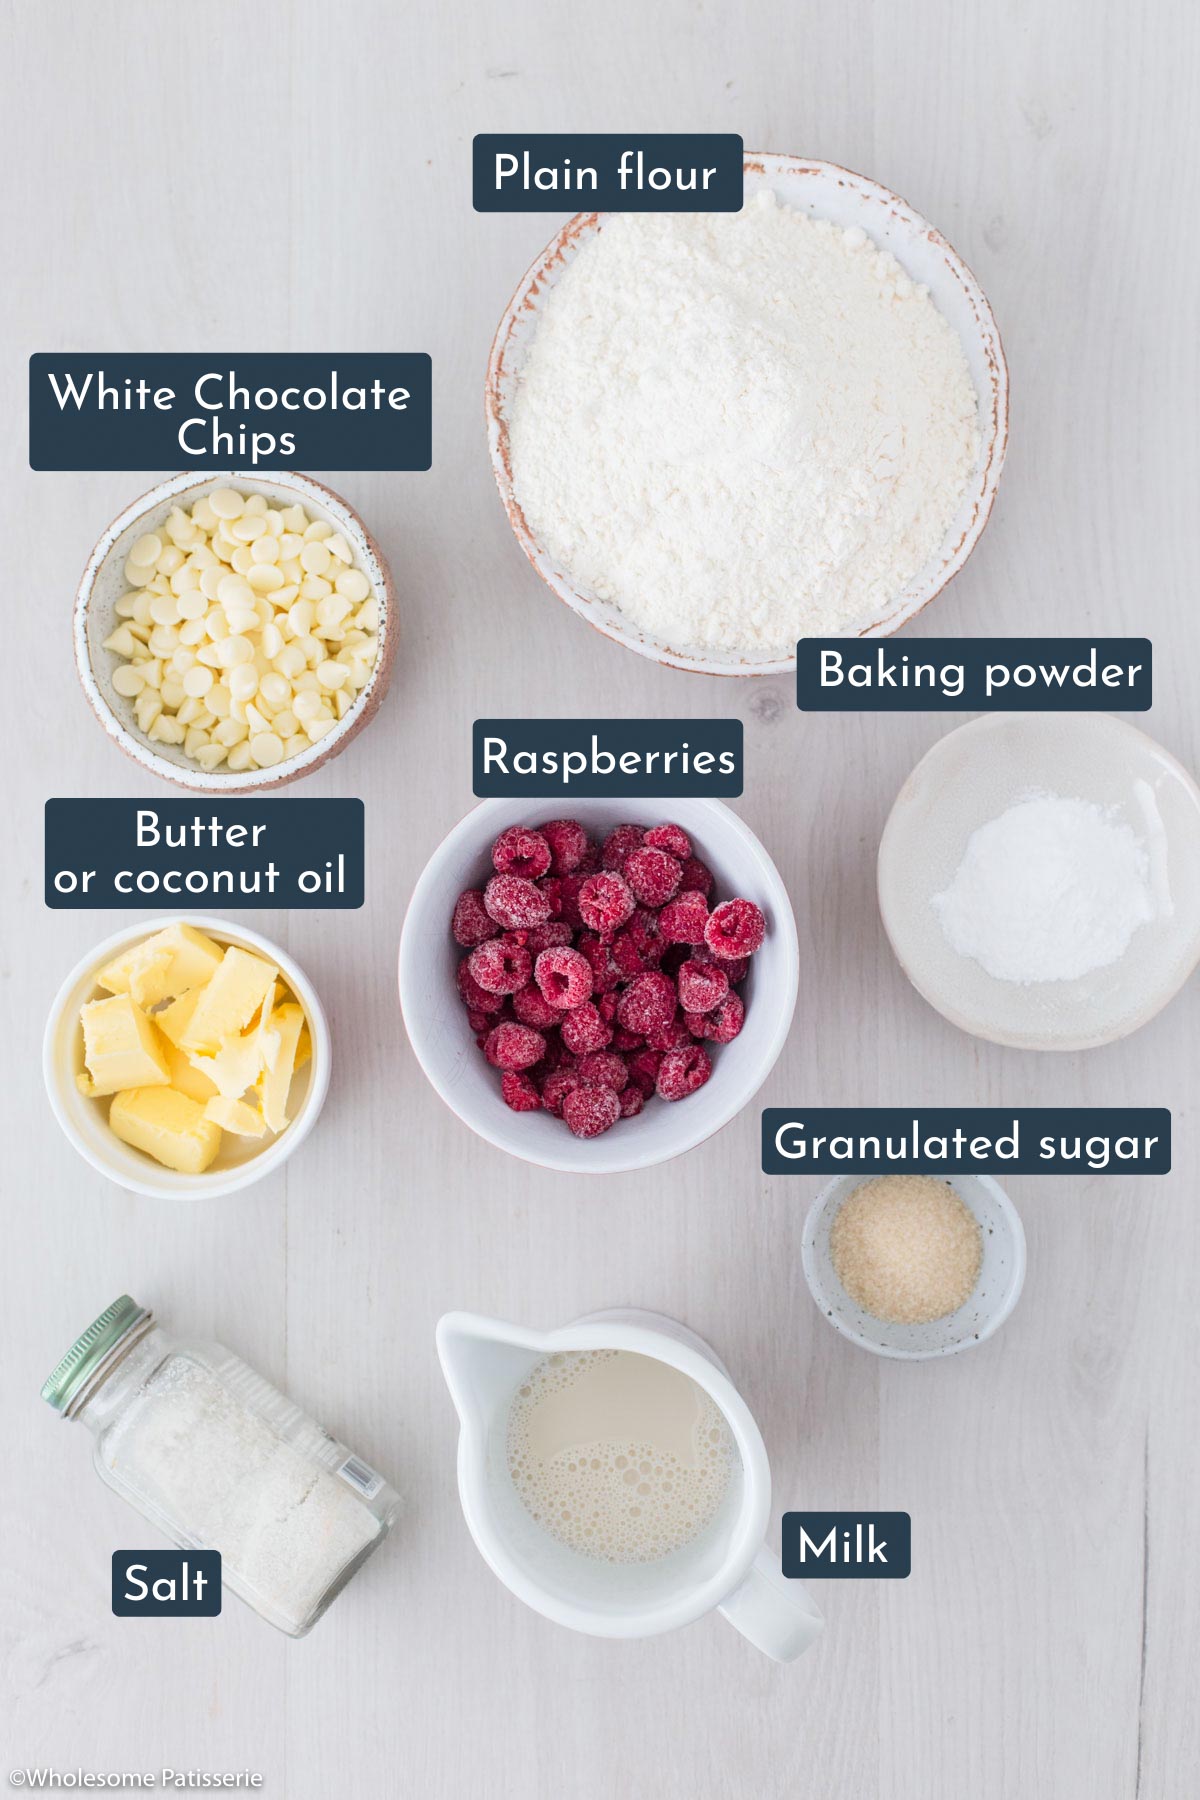 The individual ingredients laid out to show what is needed to make these scones.